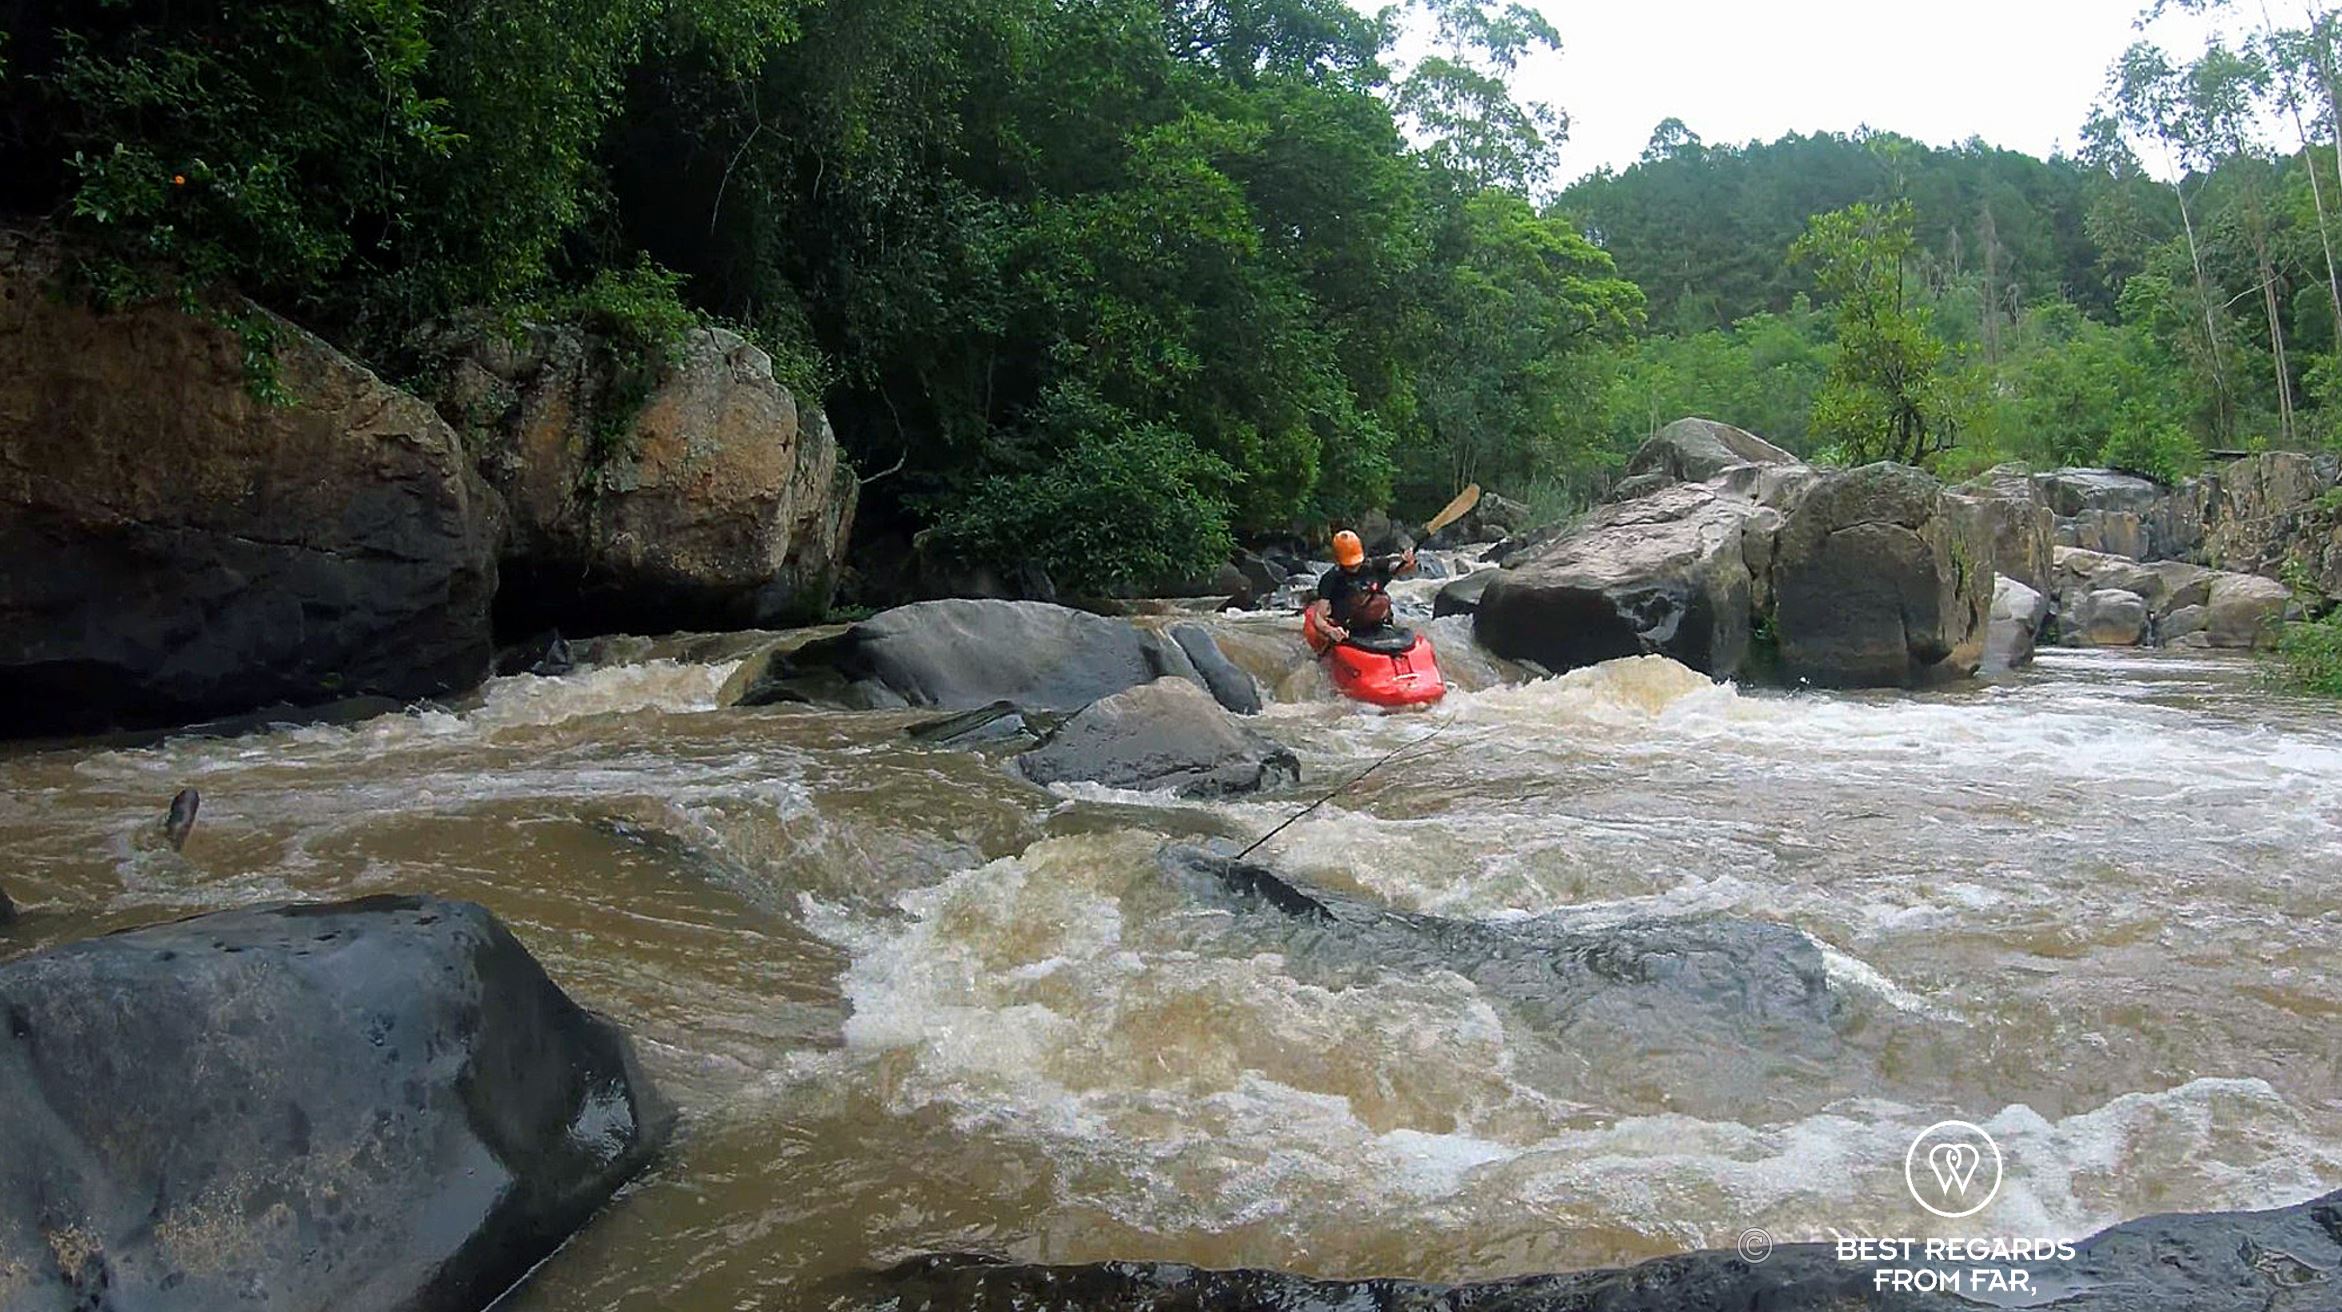 Kayak support while geckoing the Sabie River, by the Blyde River Canyon, South Africa